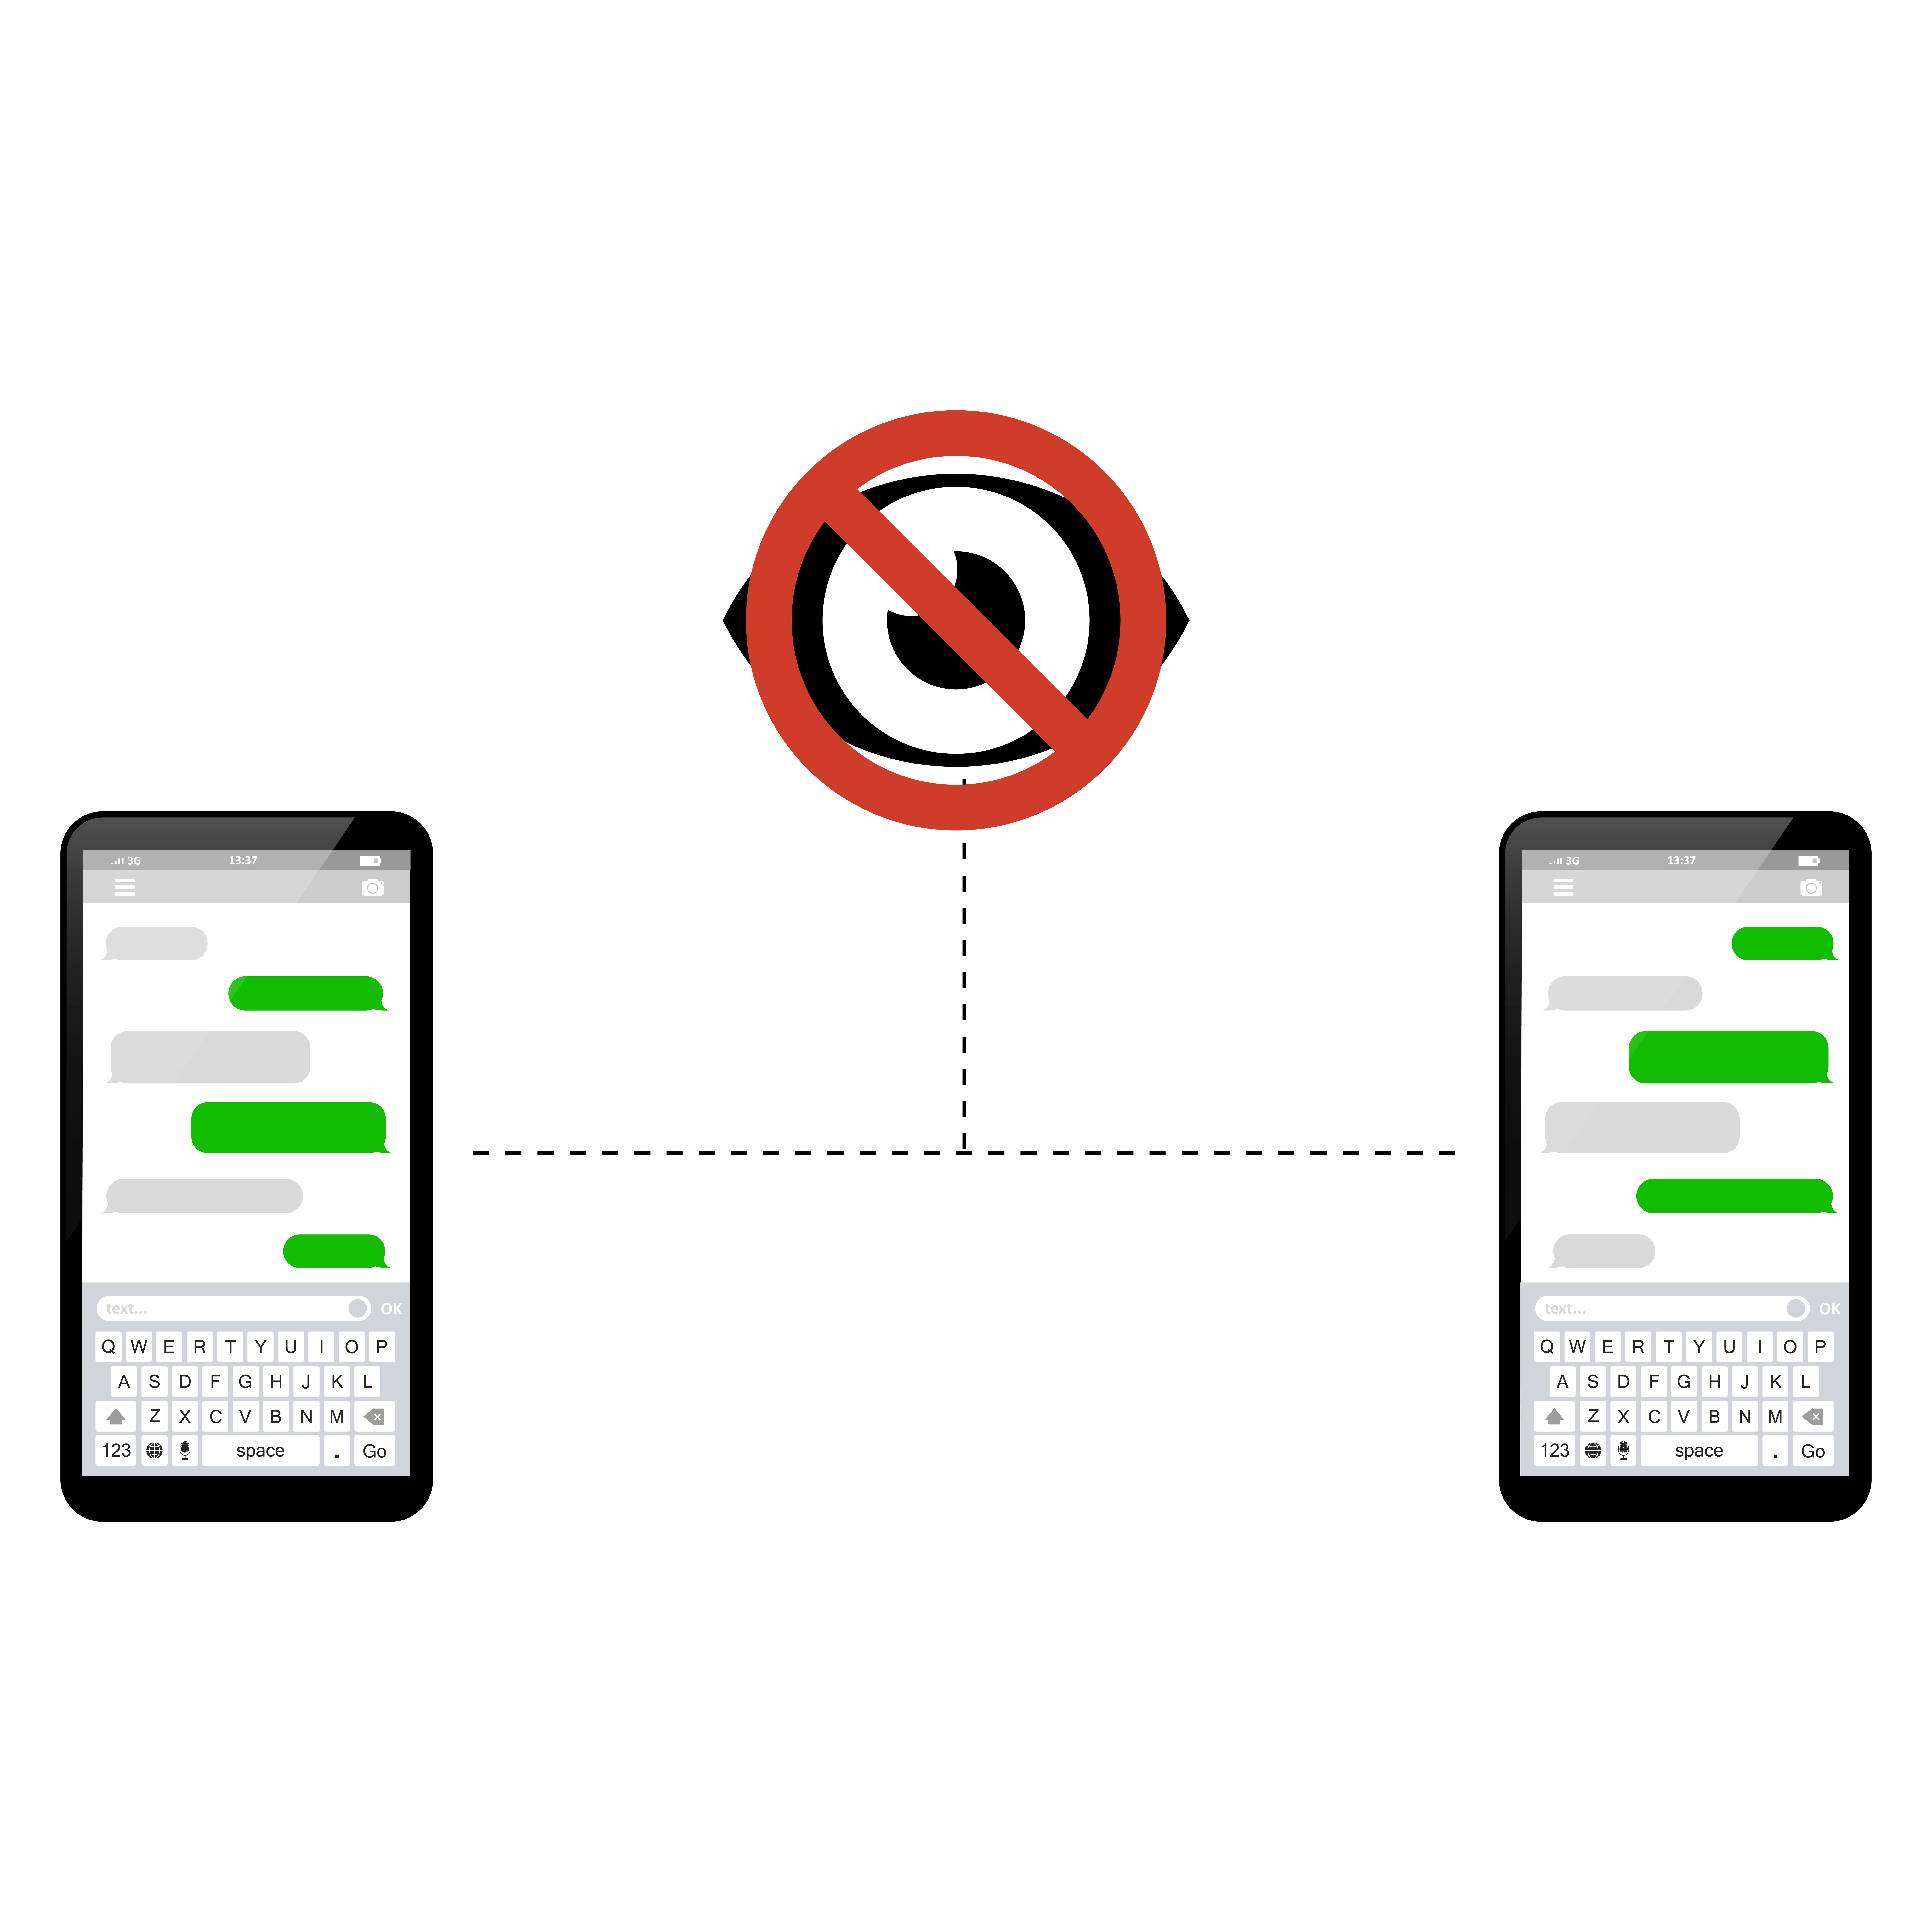 Illustration on two phones messaging and an onlooking eye blocked